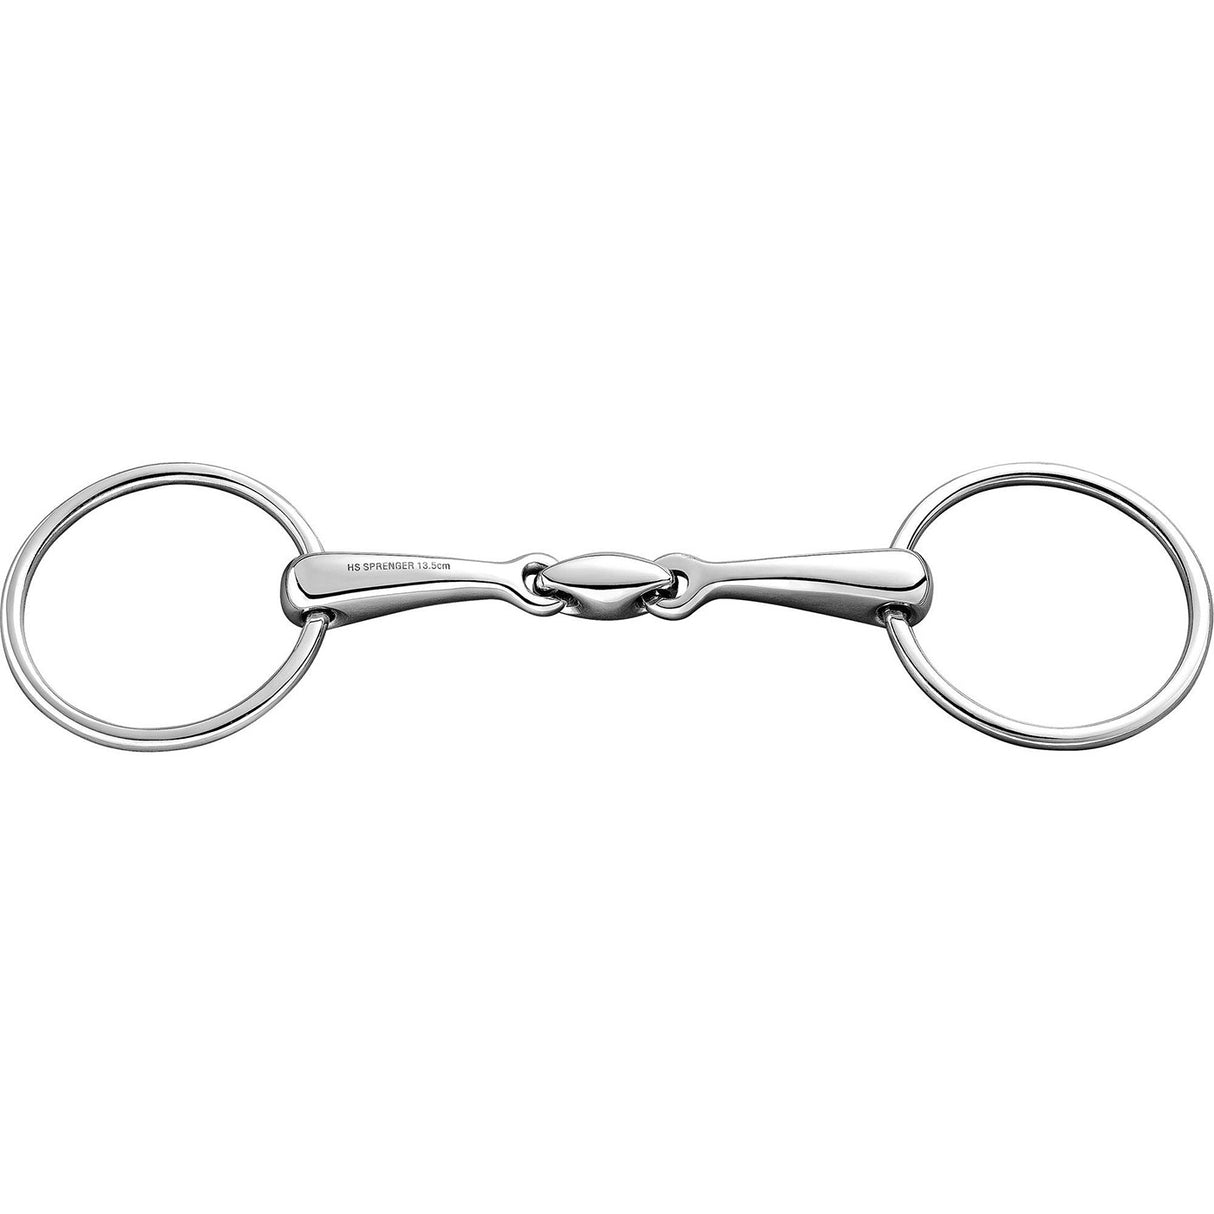 Sprenger Loose Ring Double Jointed Snaffle Bit - 16 mm